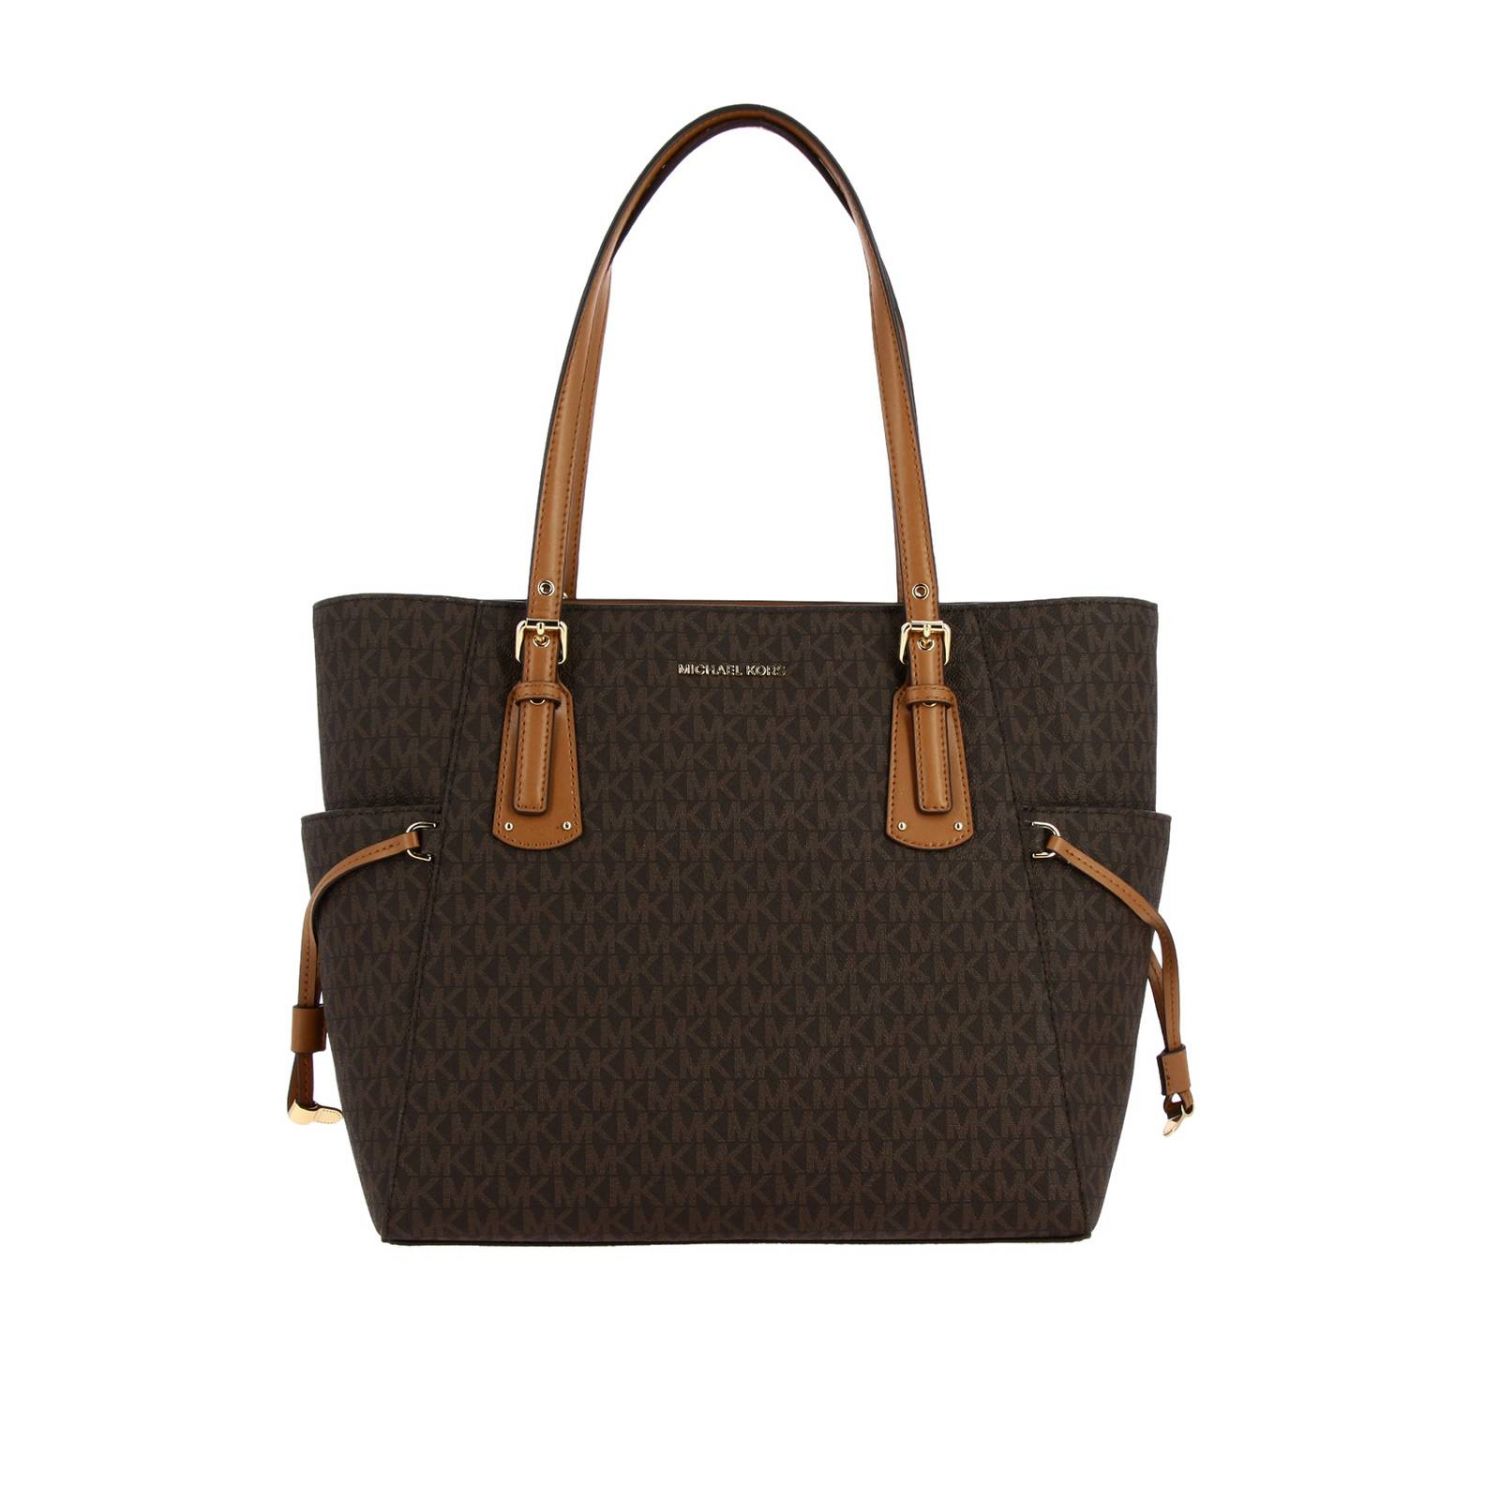 Michael Michael Kors Outlet: Voyager bag in leather with MK all over ...